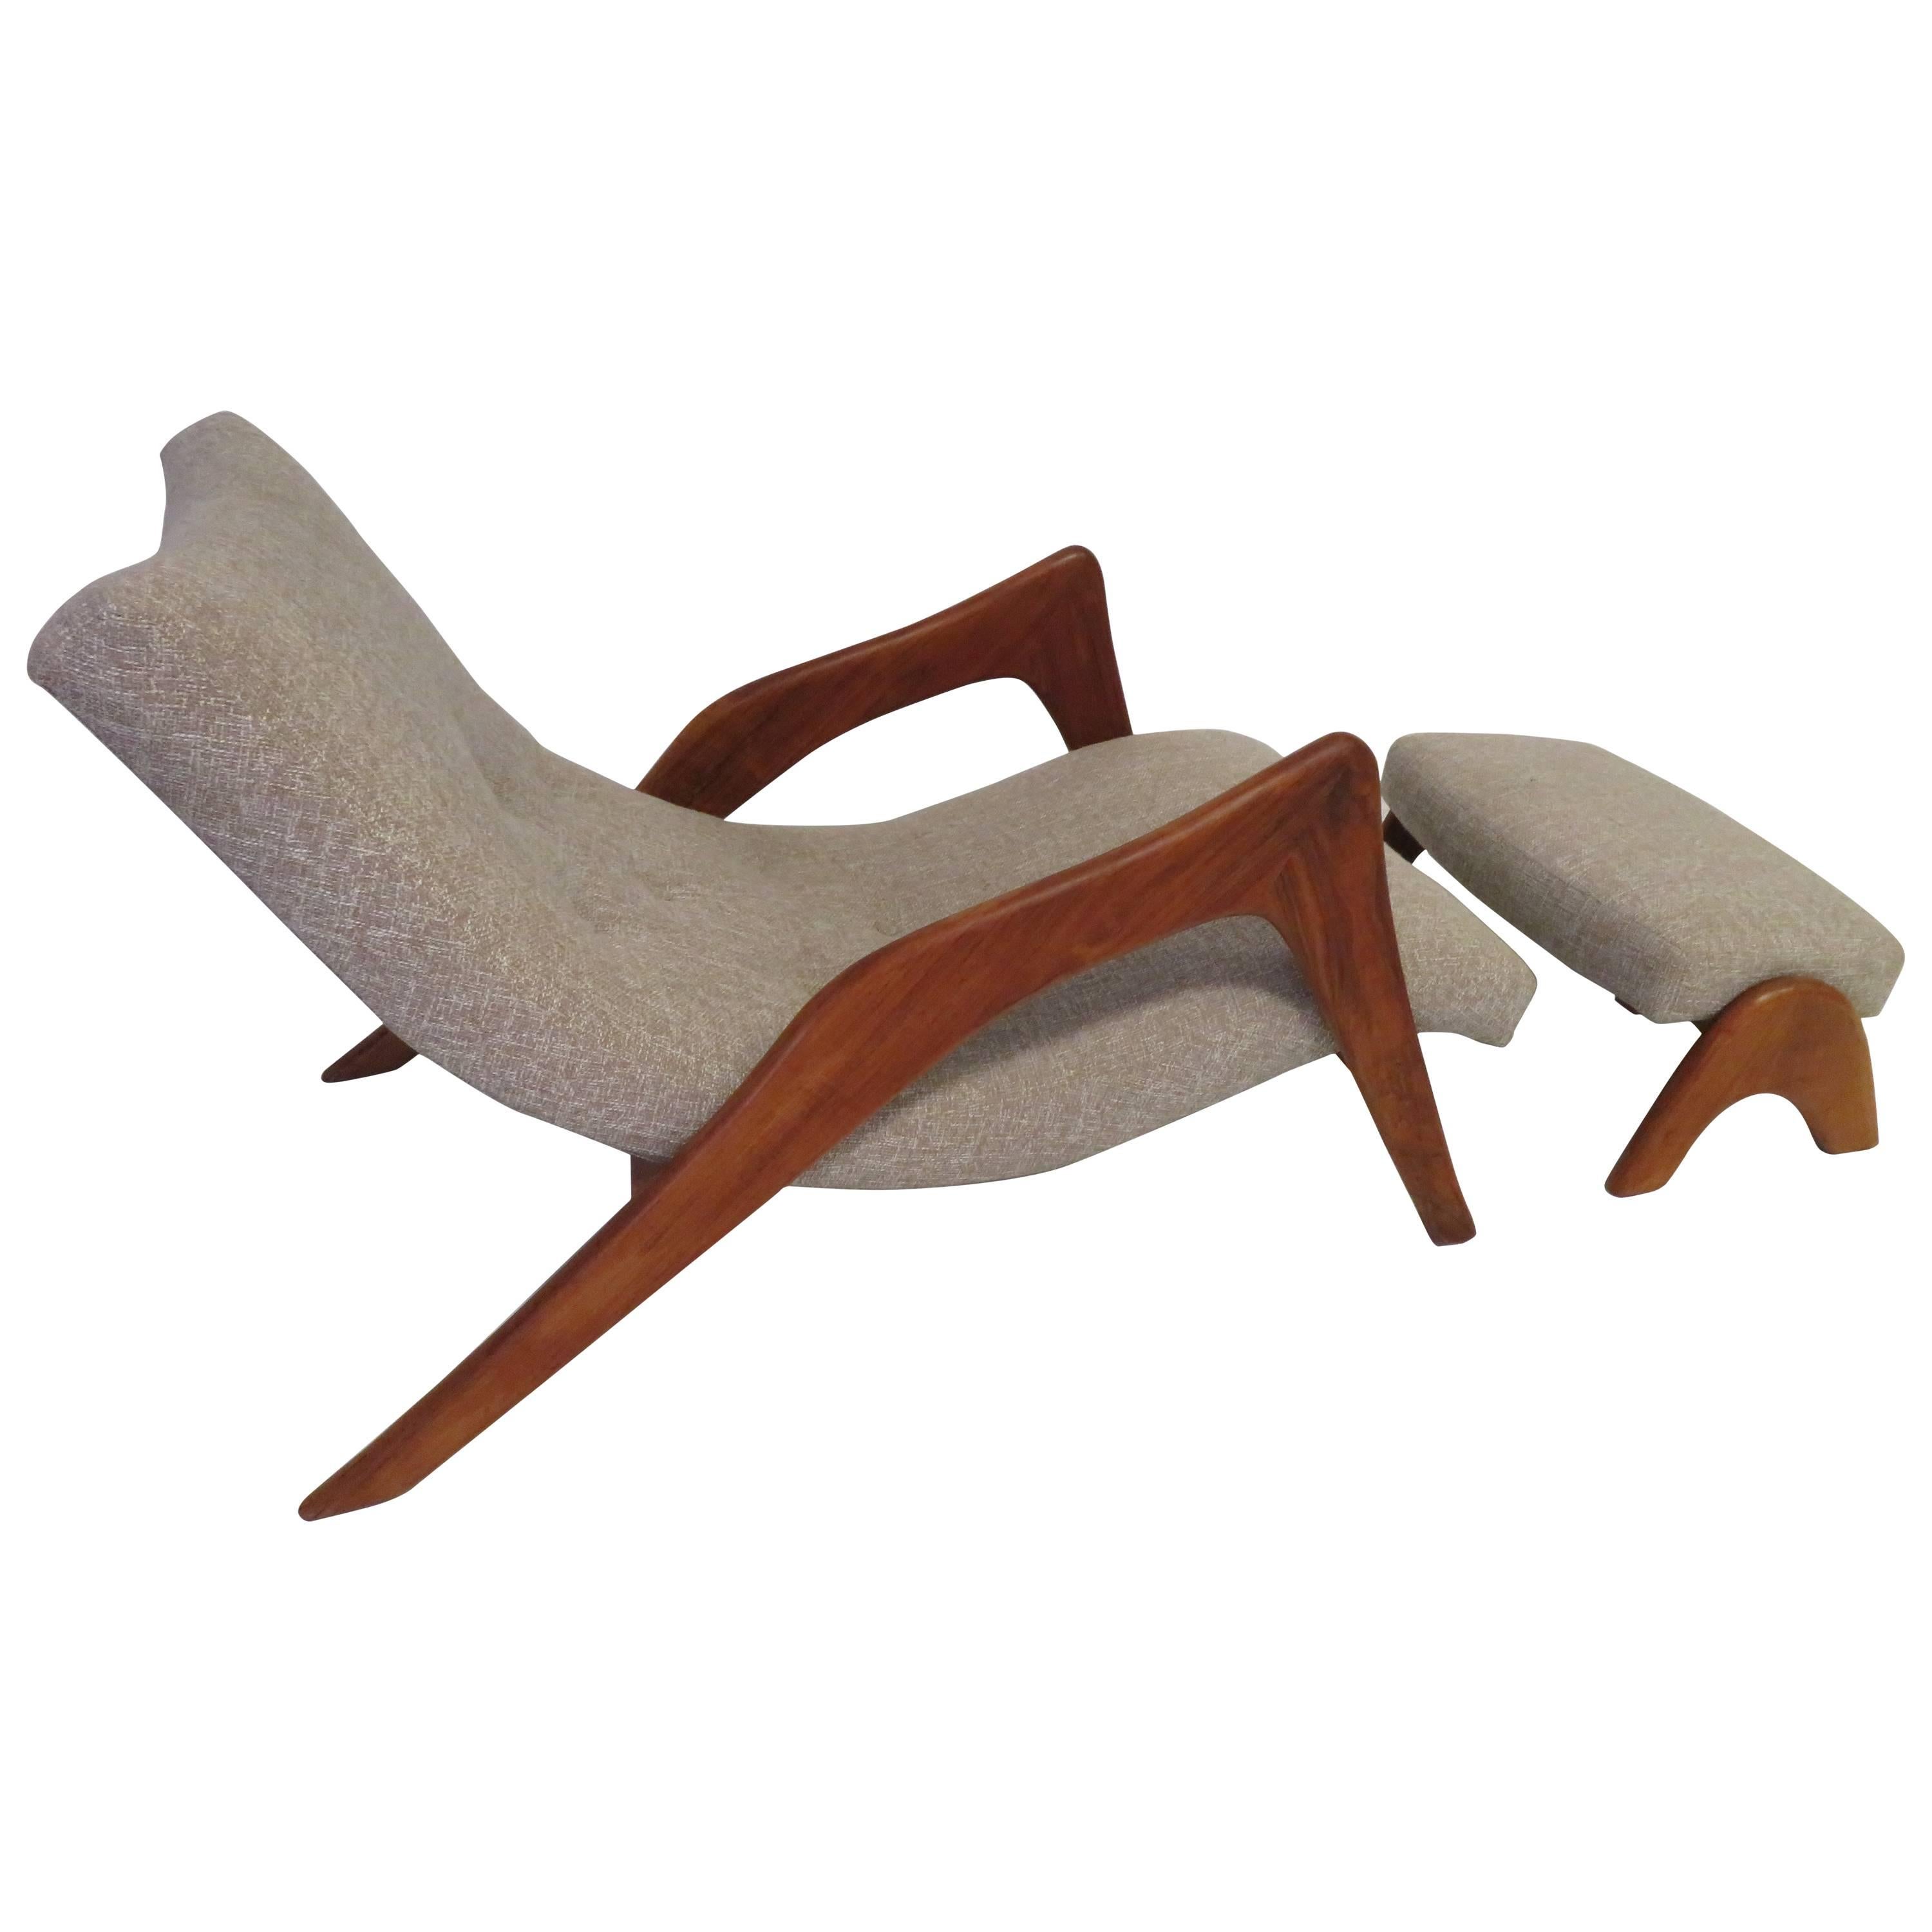 Adrian Pearsall “Grasshopper” Chaise Longue with Ottoman for Craft Associates